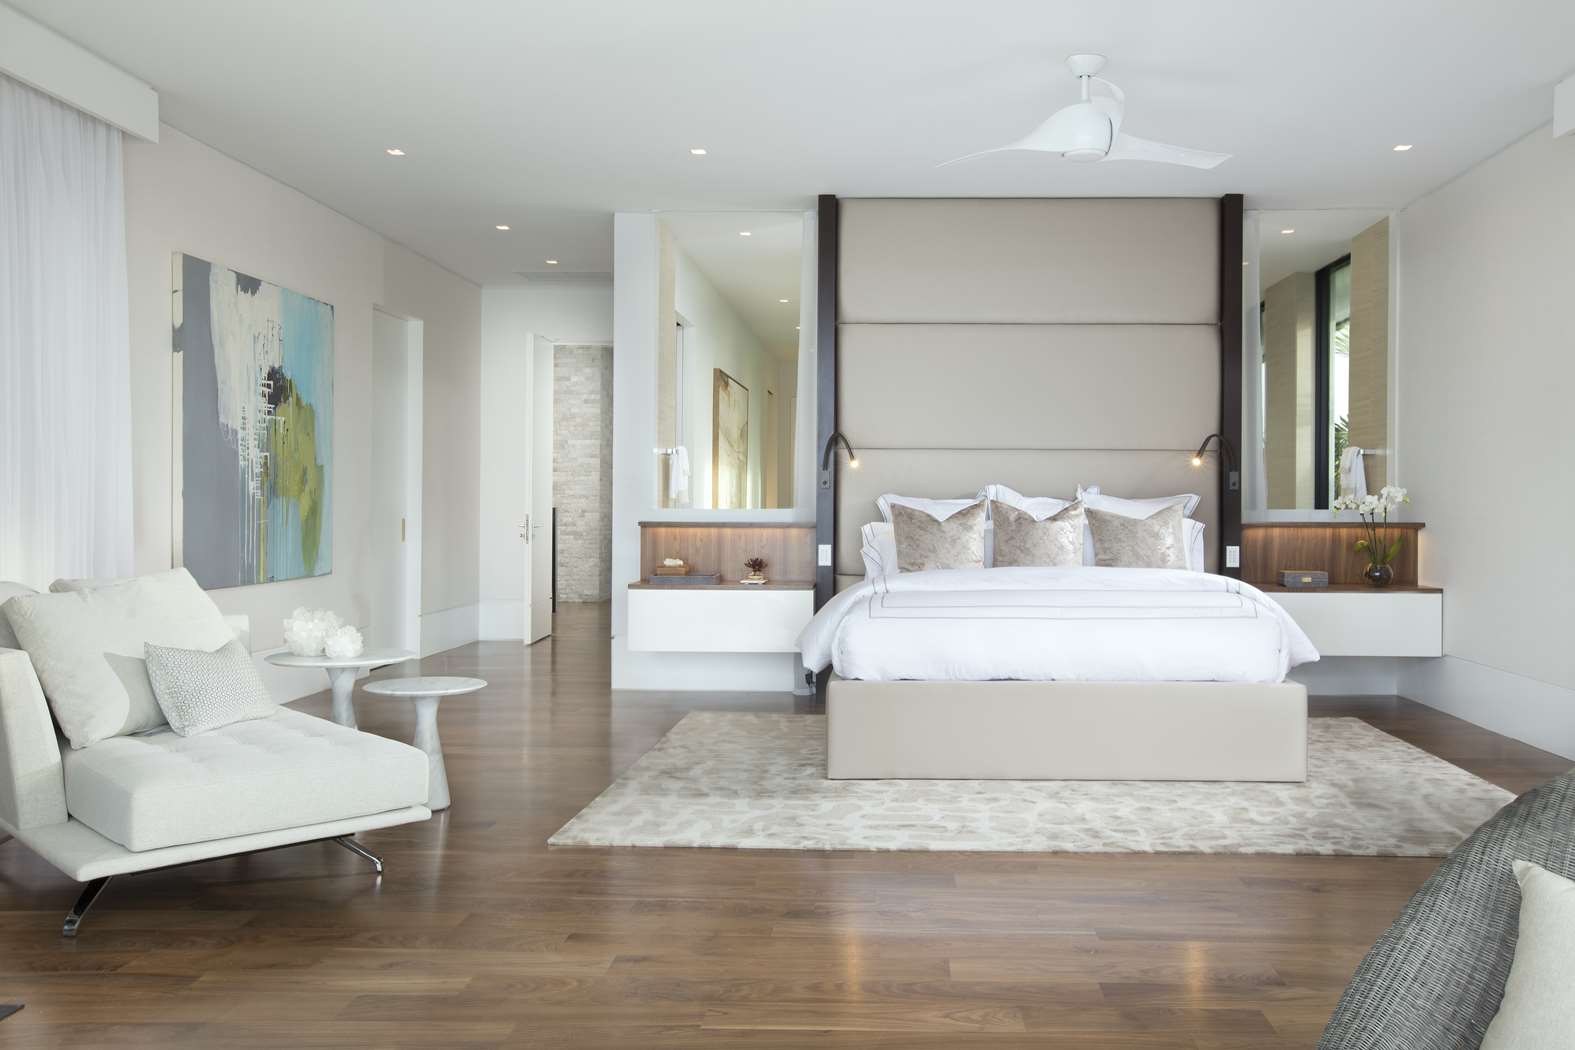 bedroom master layout waterfront contemporary bedrooms interiors elegance lauderdale dkor furniture ft interior basics guide fort project inside reveal dkorinteriors